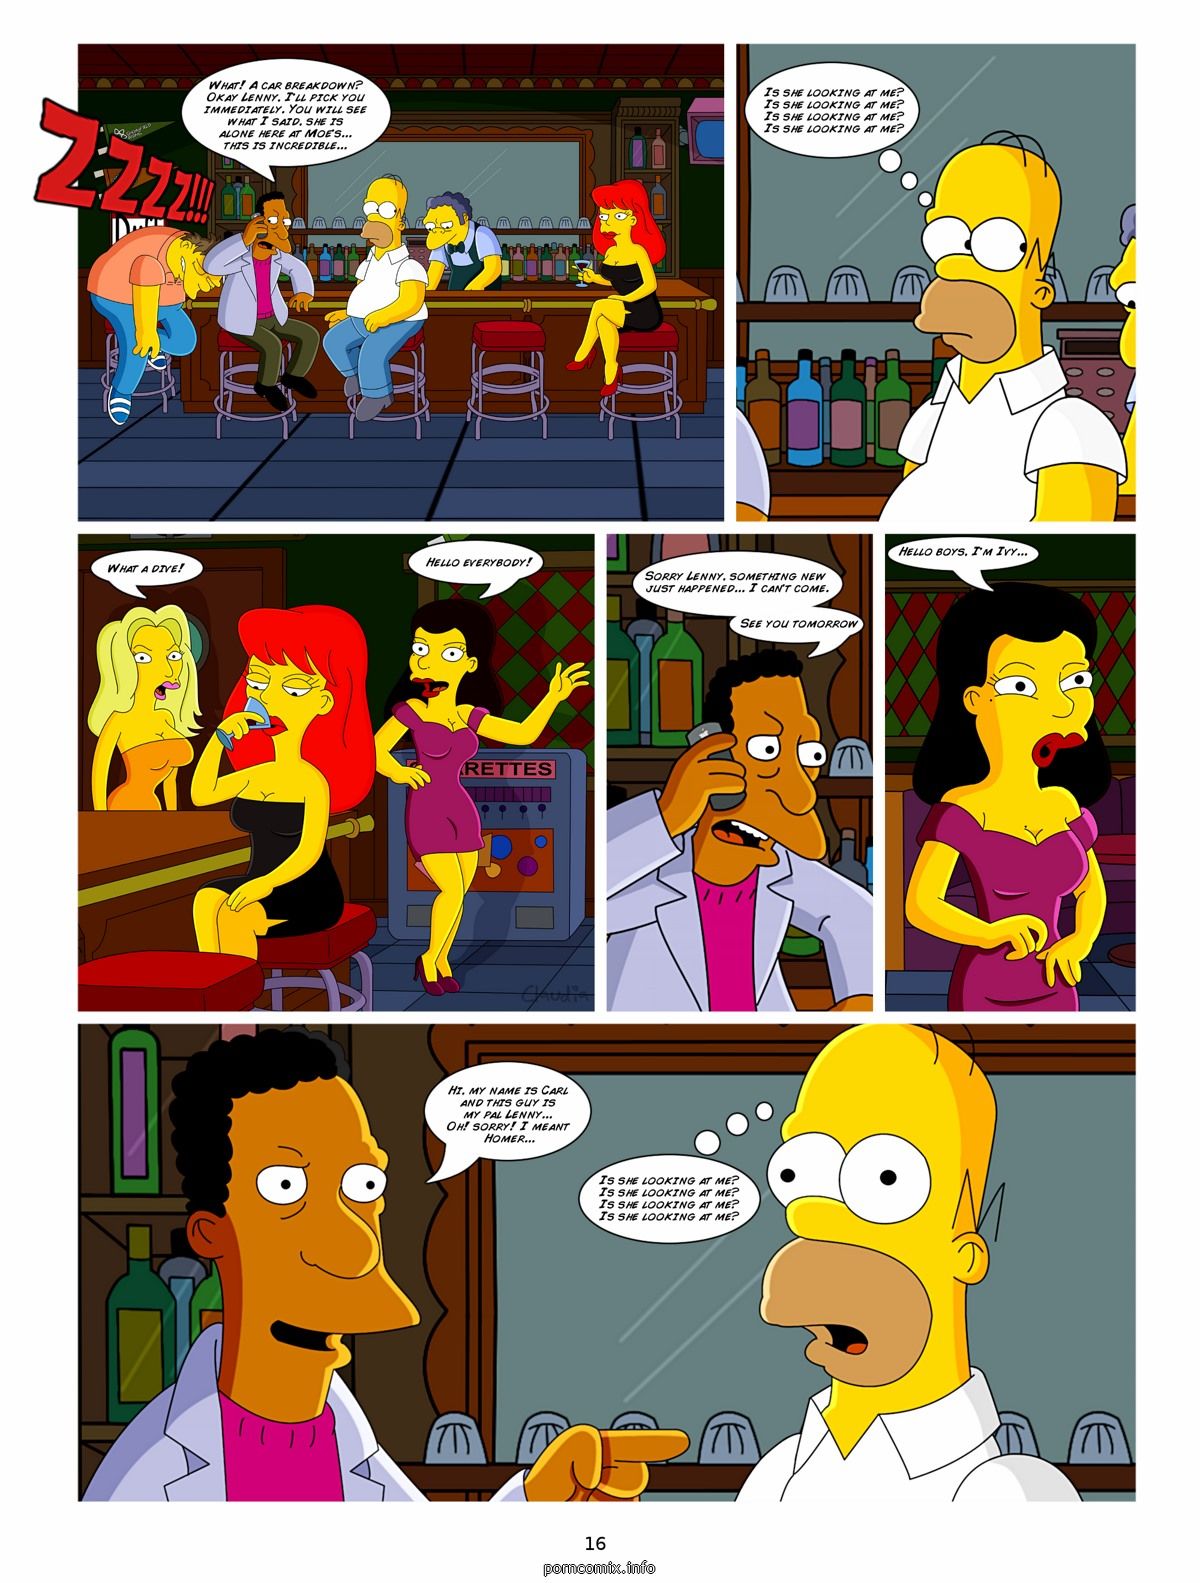 [Claudia] The Simpsons - Road To Springfield page 17